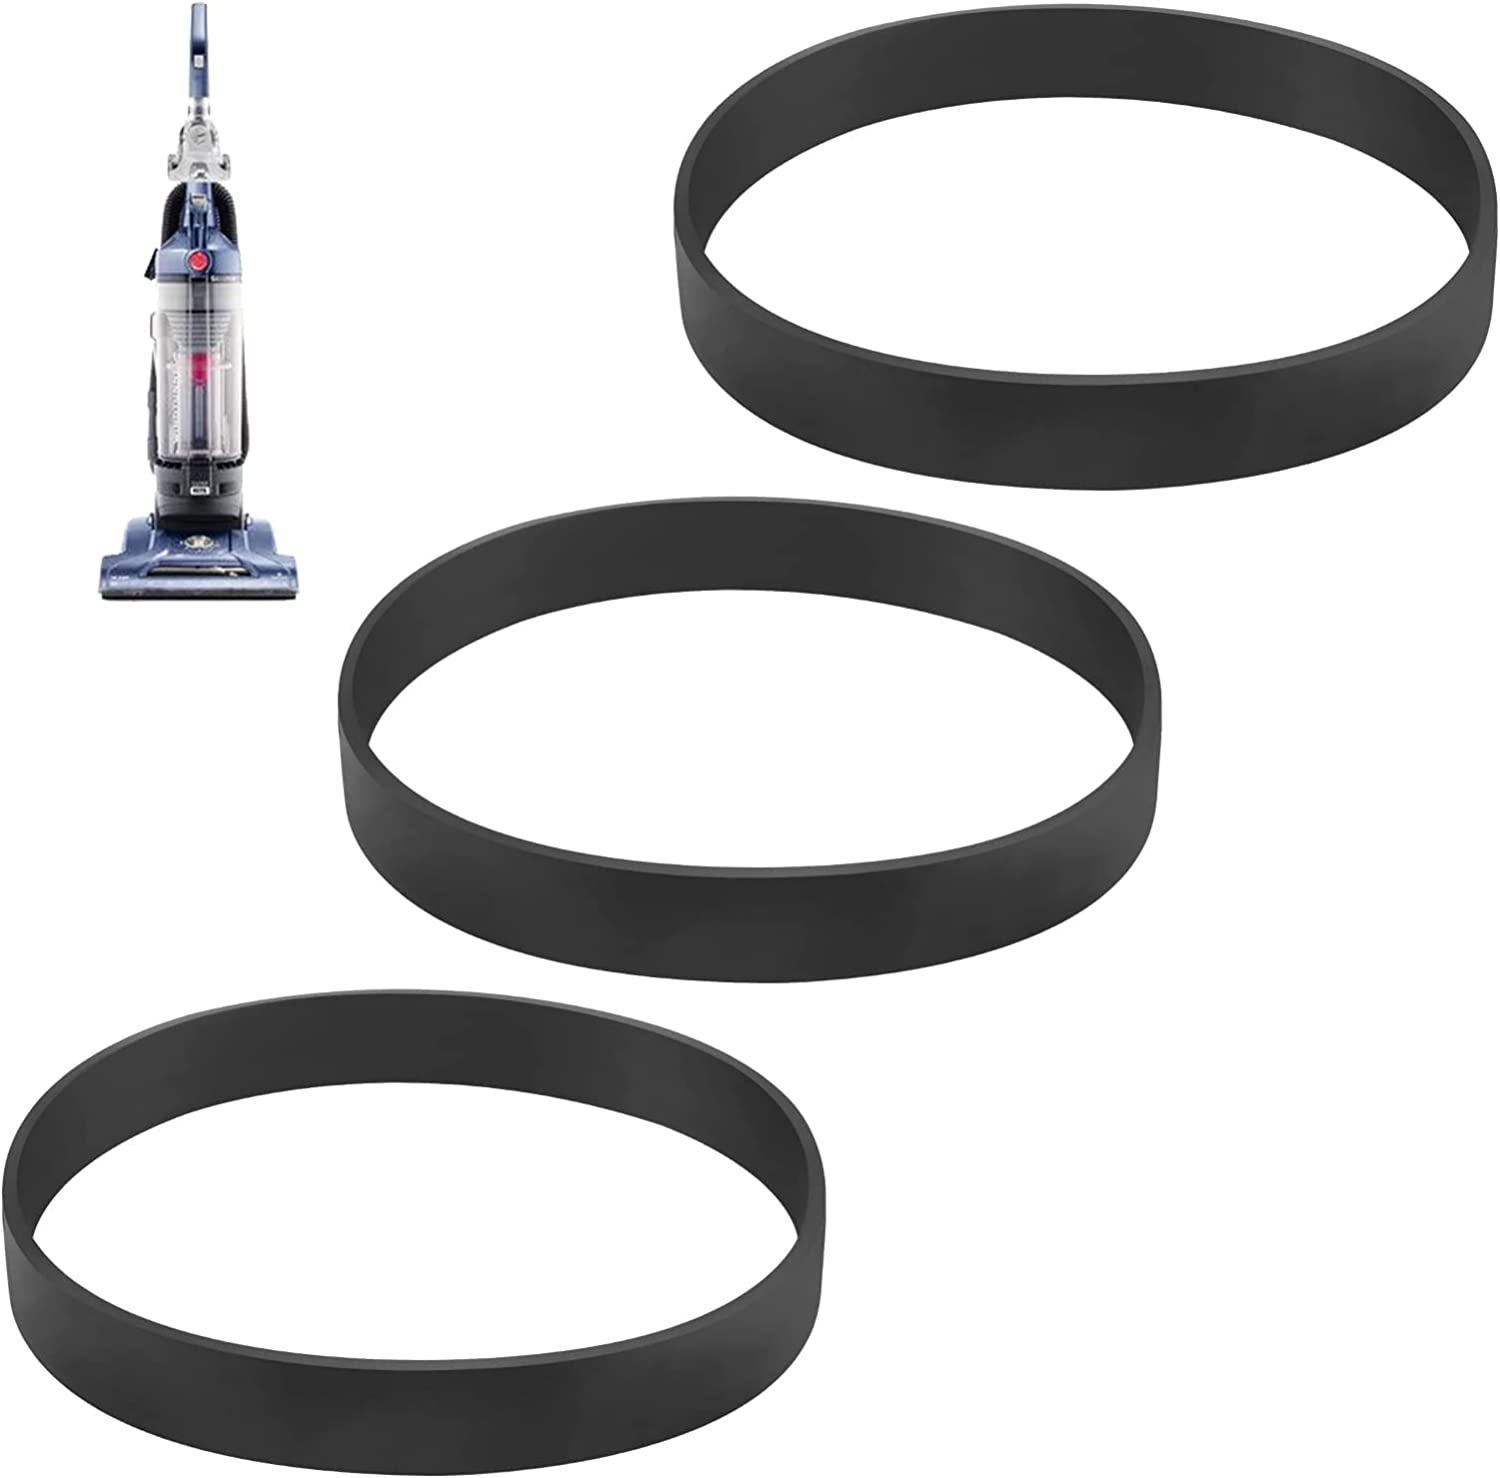 KEEPOW 3 Pack Vacuum Belts Fit for Hoover WindTunnel & Tempo Cleaner